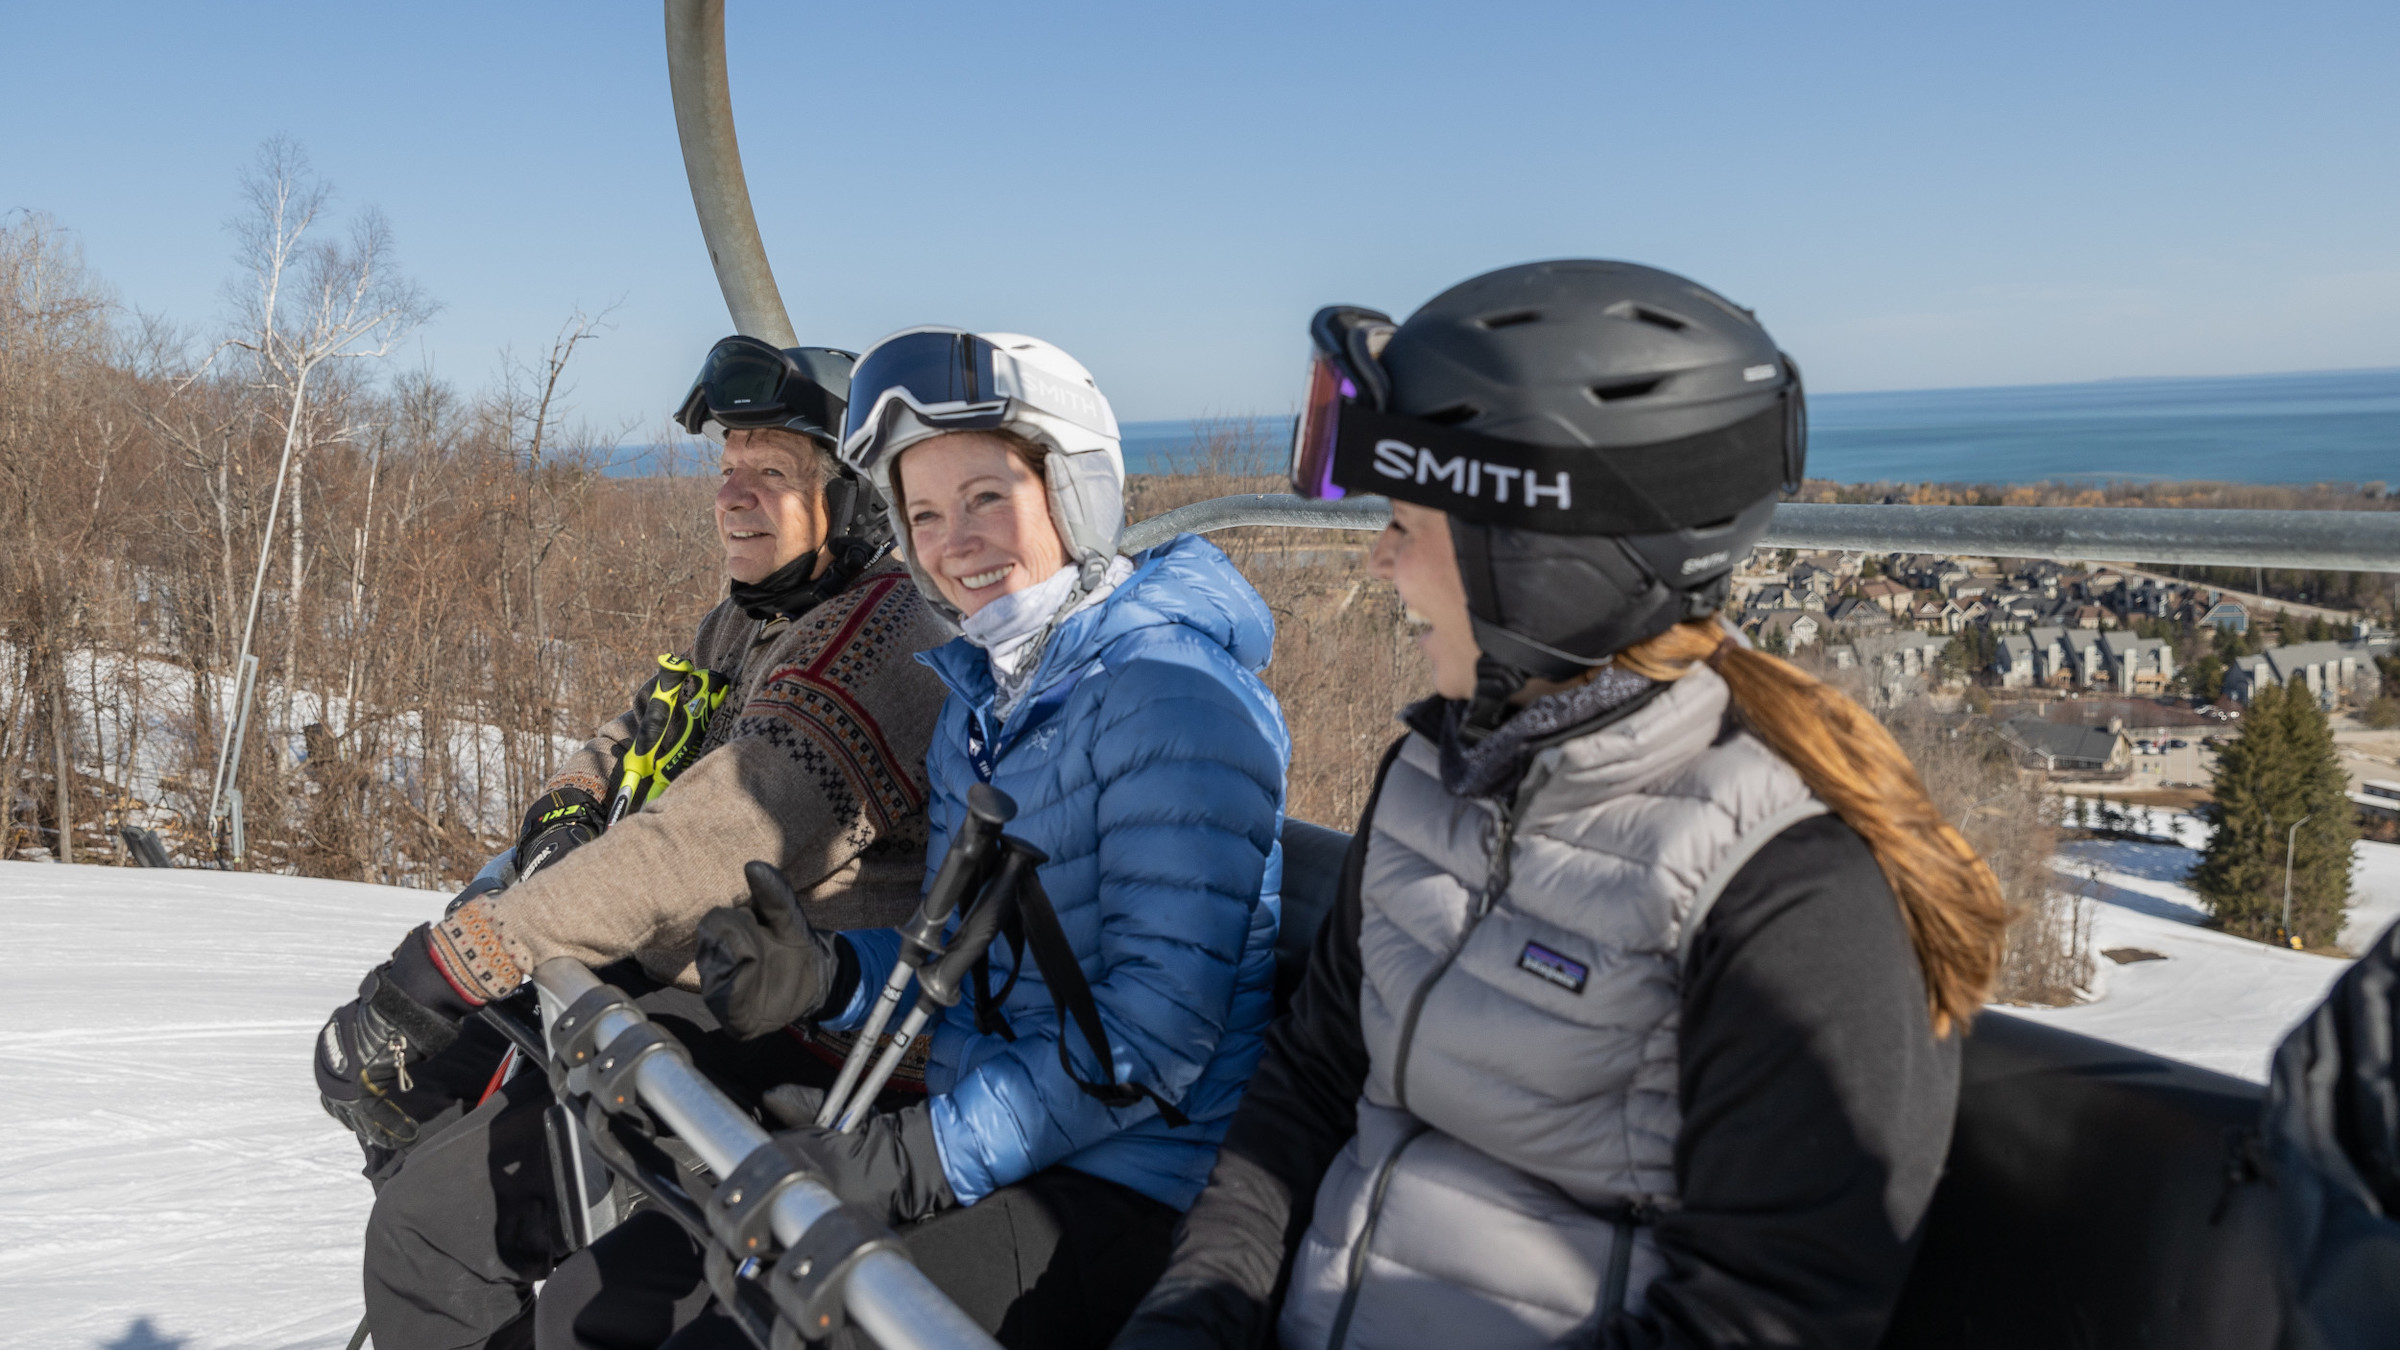 Skiers and snowboarders on lift at Blue Mountain in Spring